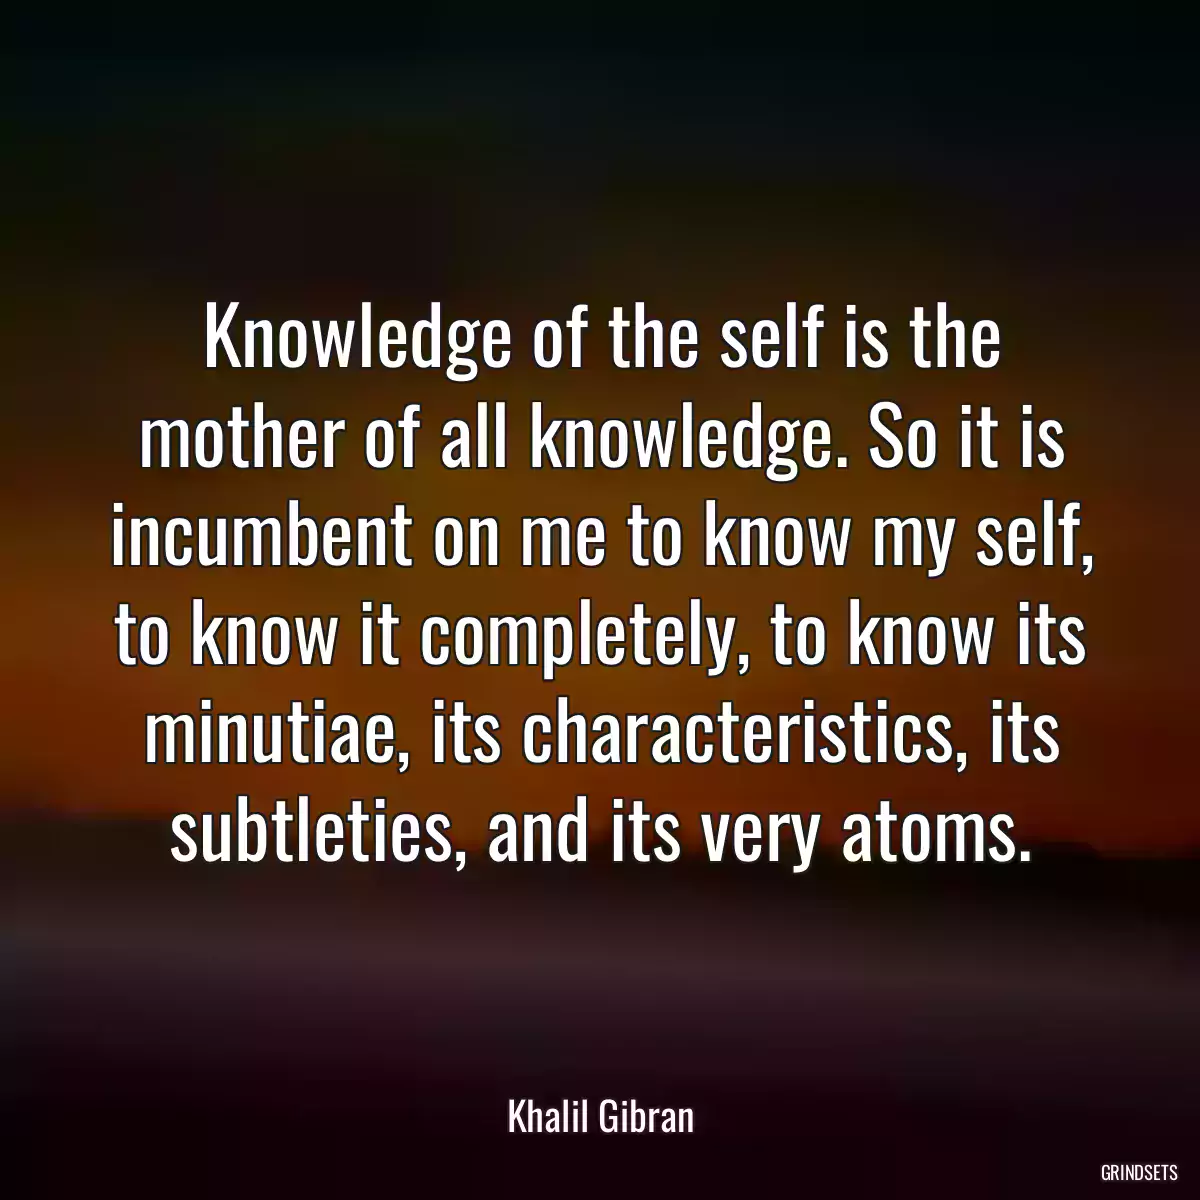 Knowledge of the self is the mother of all knowledge. So it is incumbent on me to know my self, to know it completely, to know its minutiae, its characteristics, its subtleties, and its very atoms.